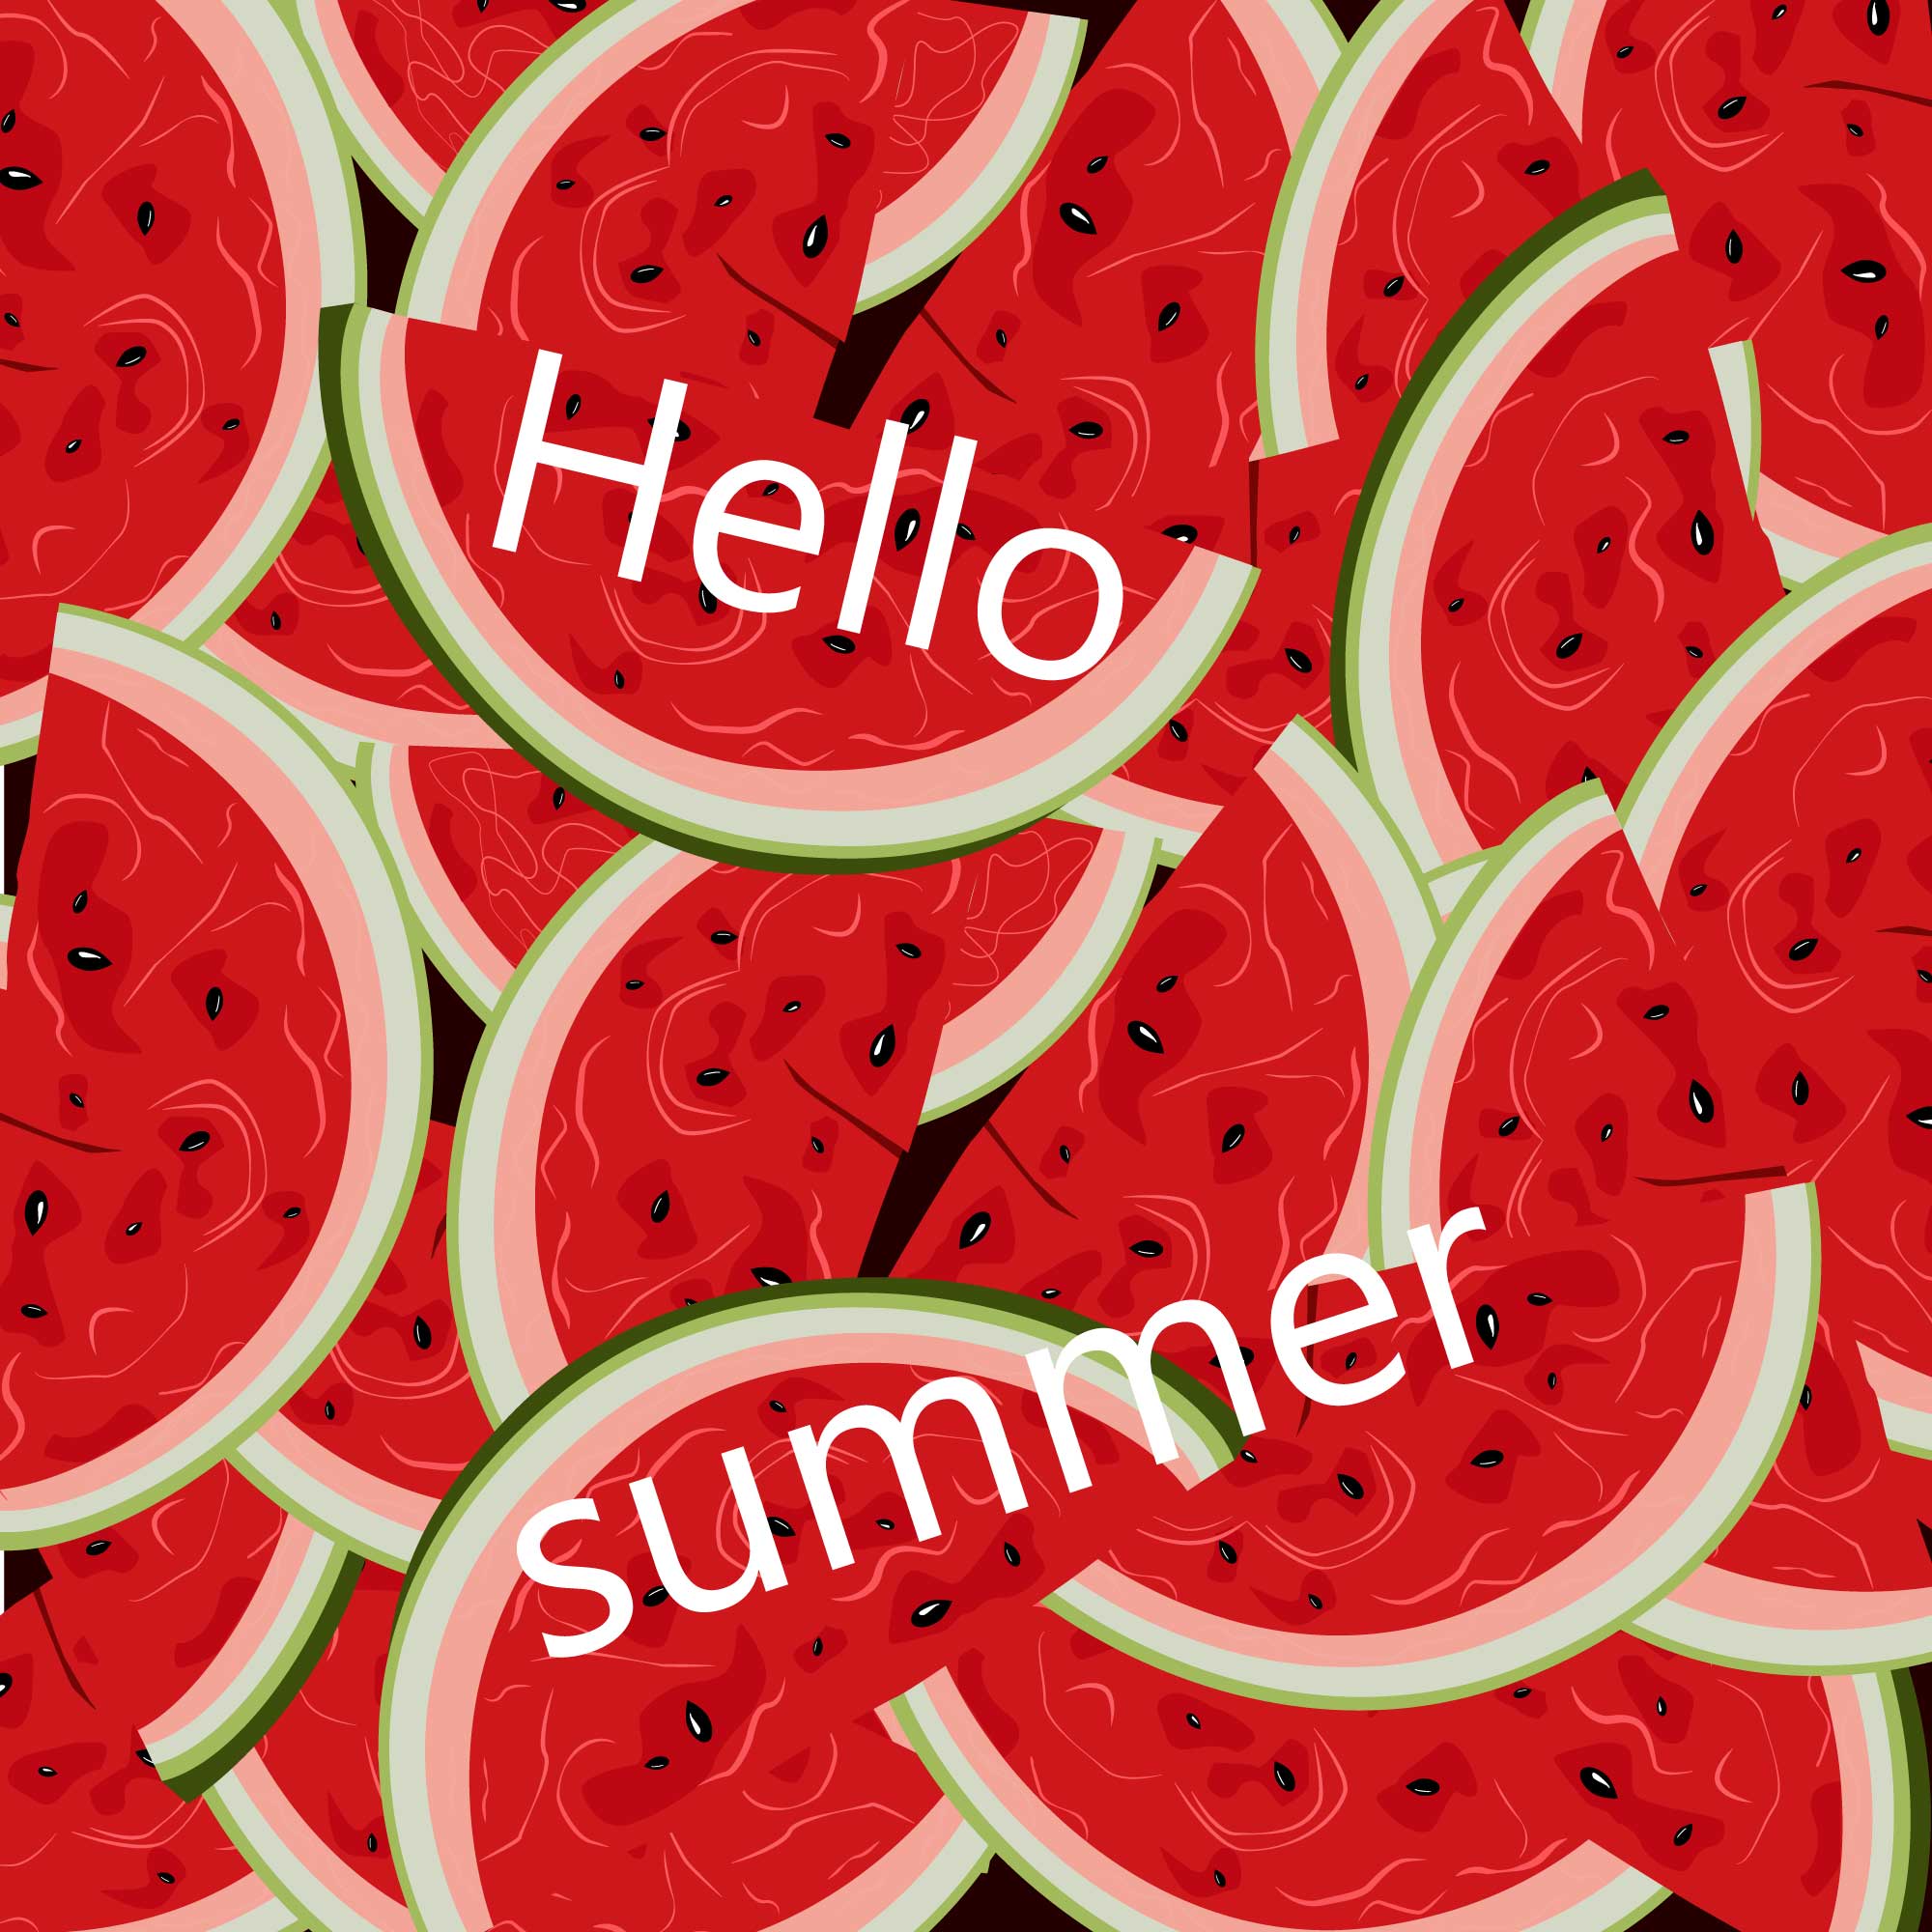 Watermelon preview image.